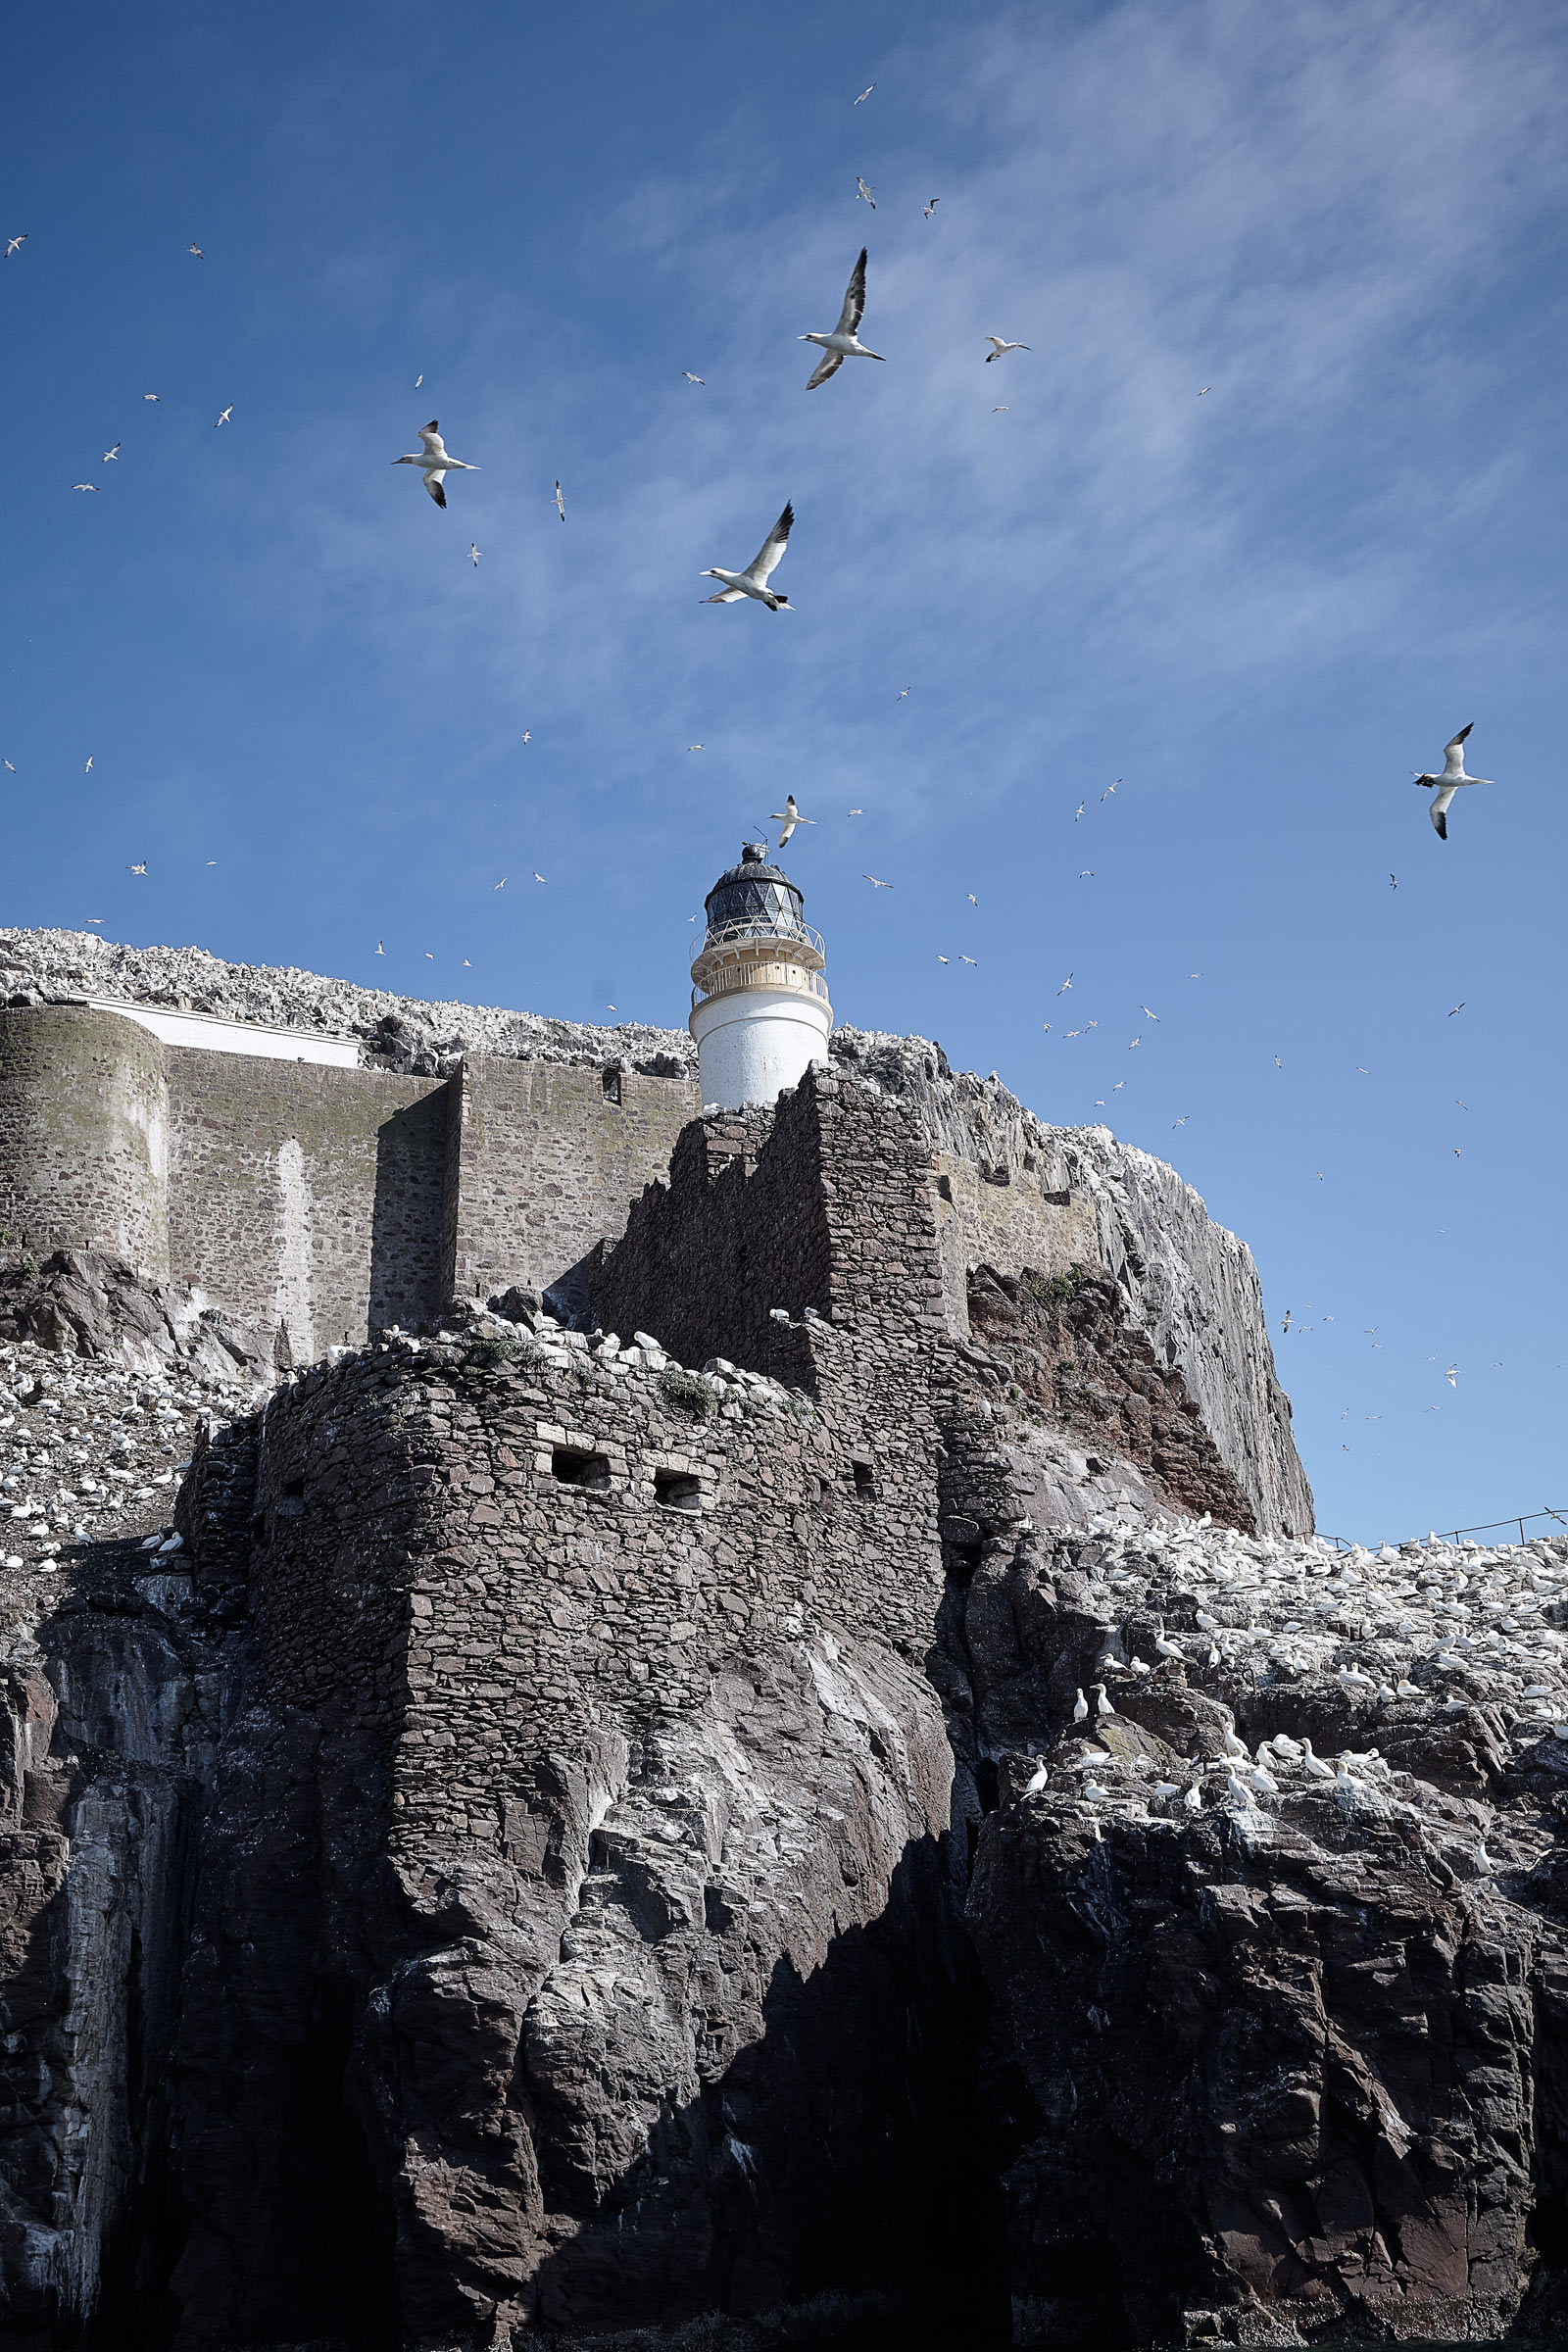 Bass Rock Lighthouse and Gannets, Alastair Ferrier travel and editorial photographer.